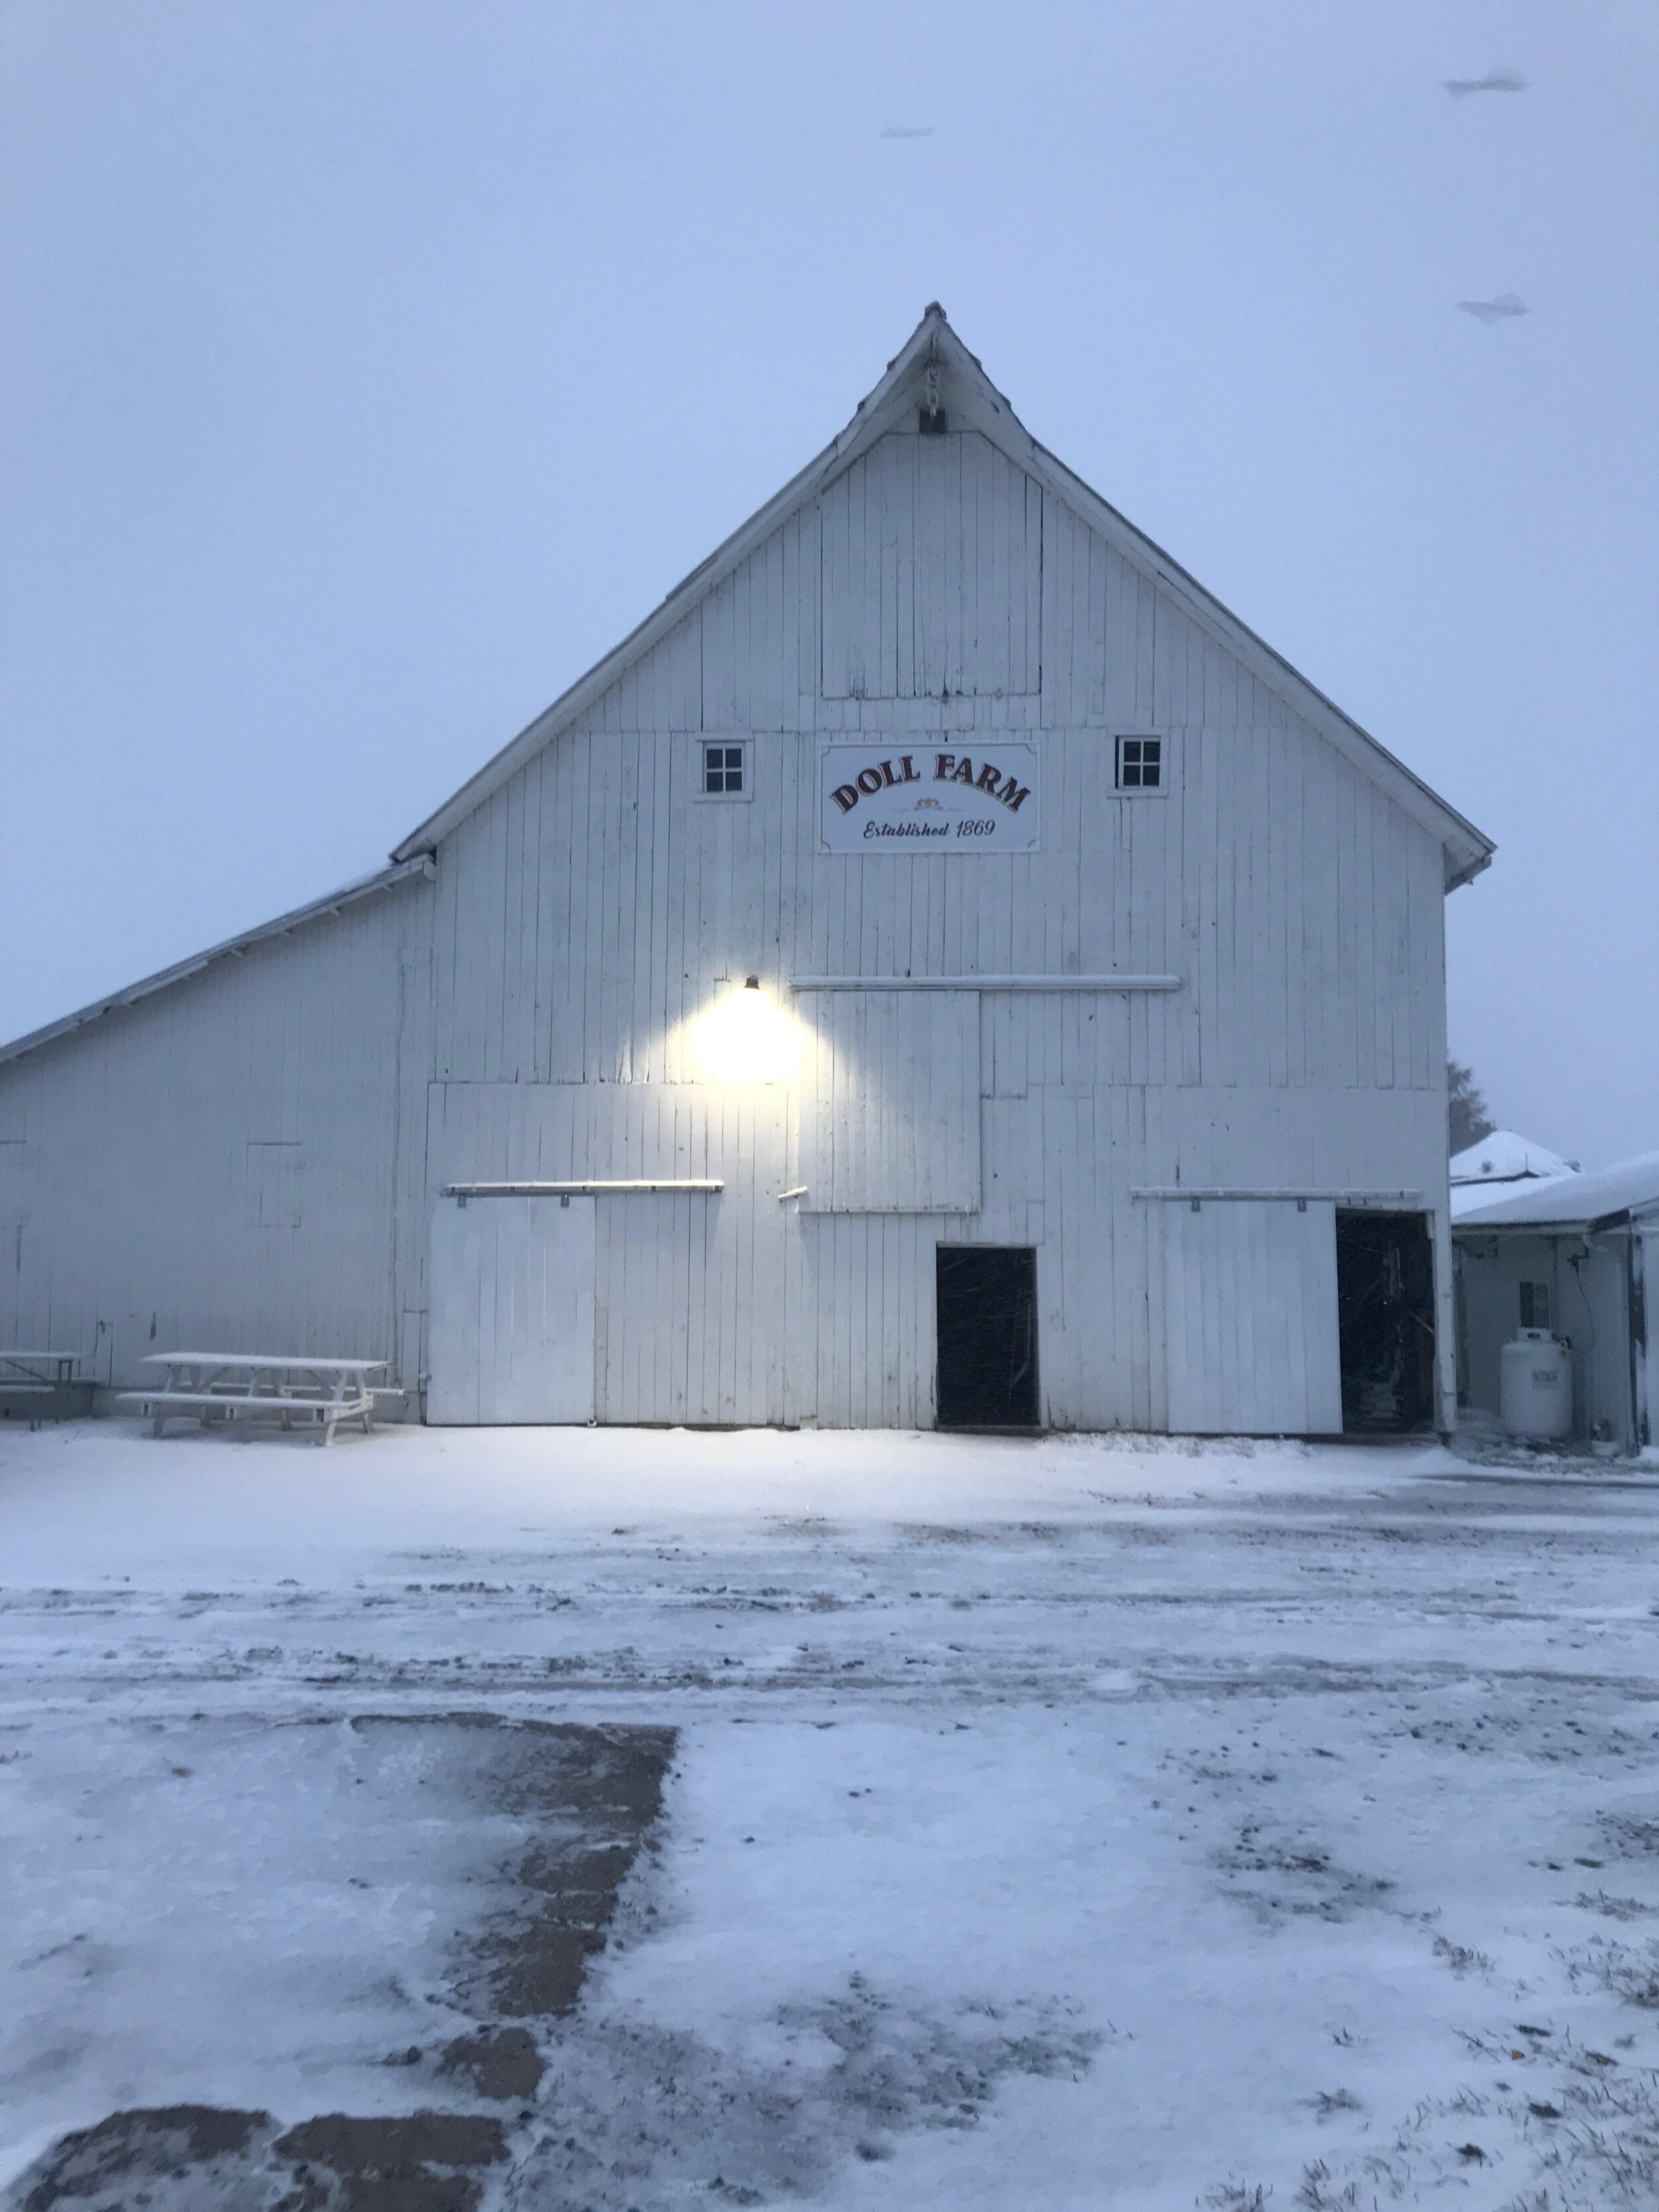 Our 1913 horse barn this morning